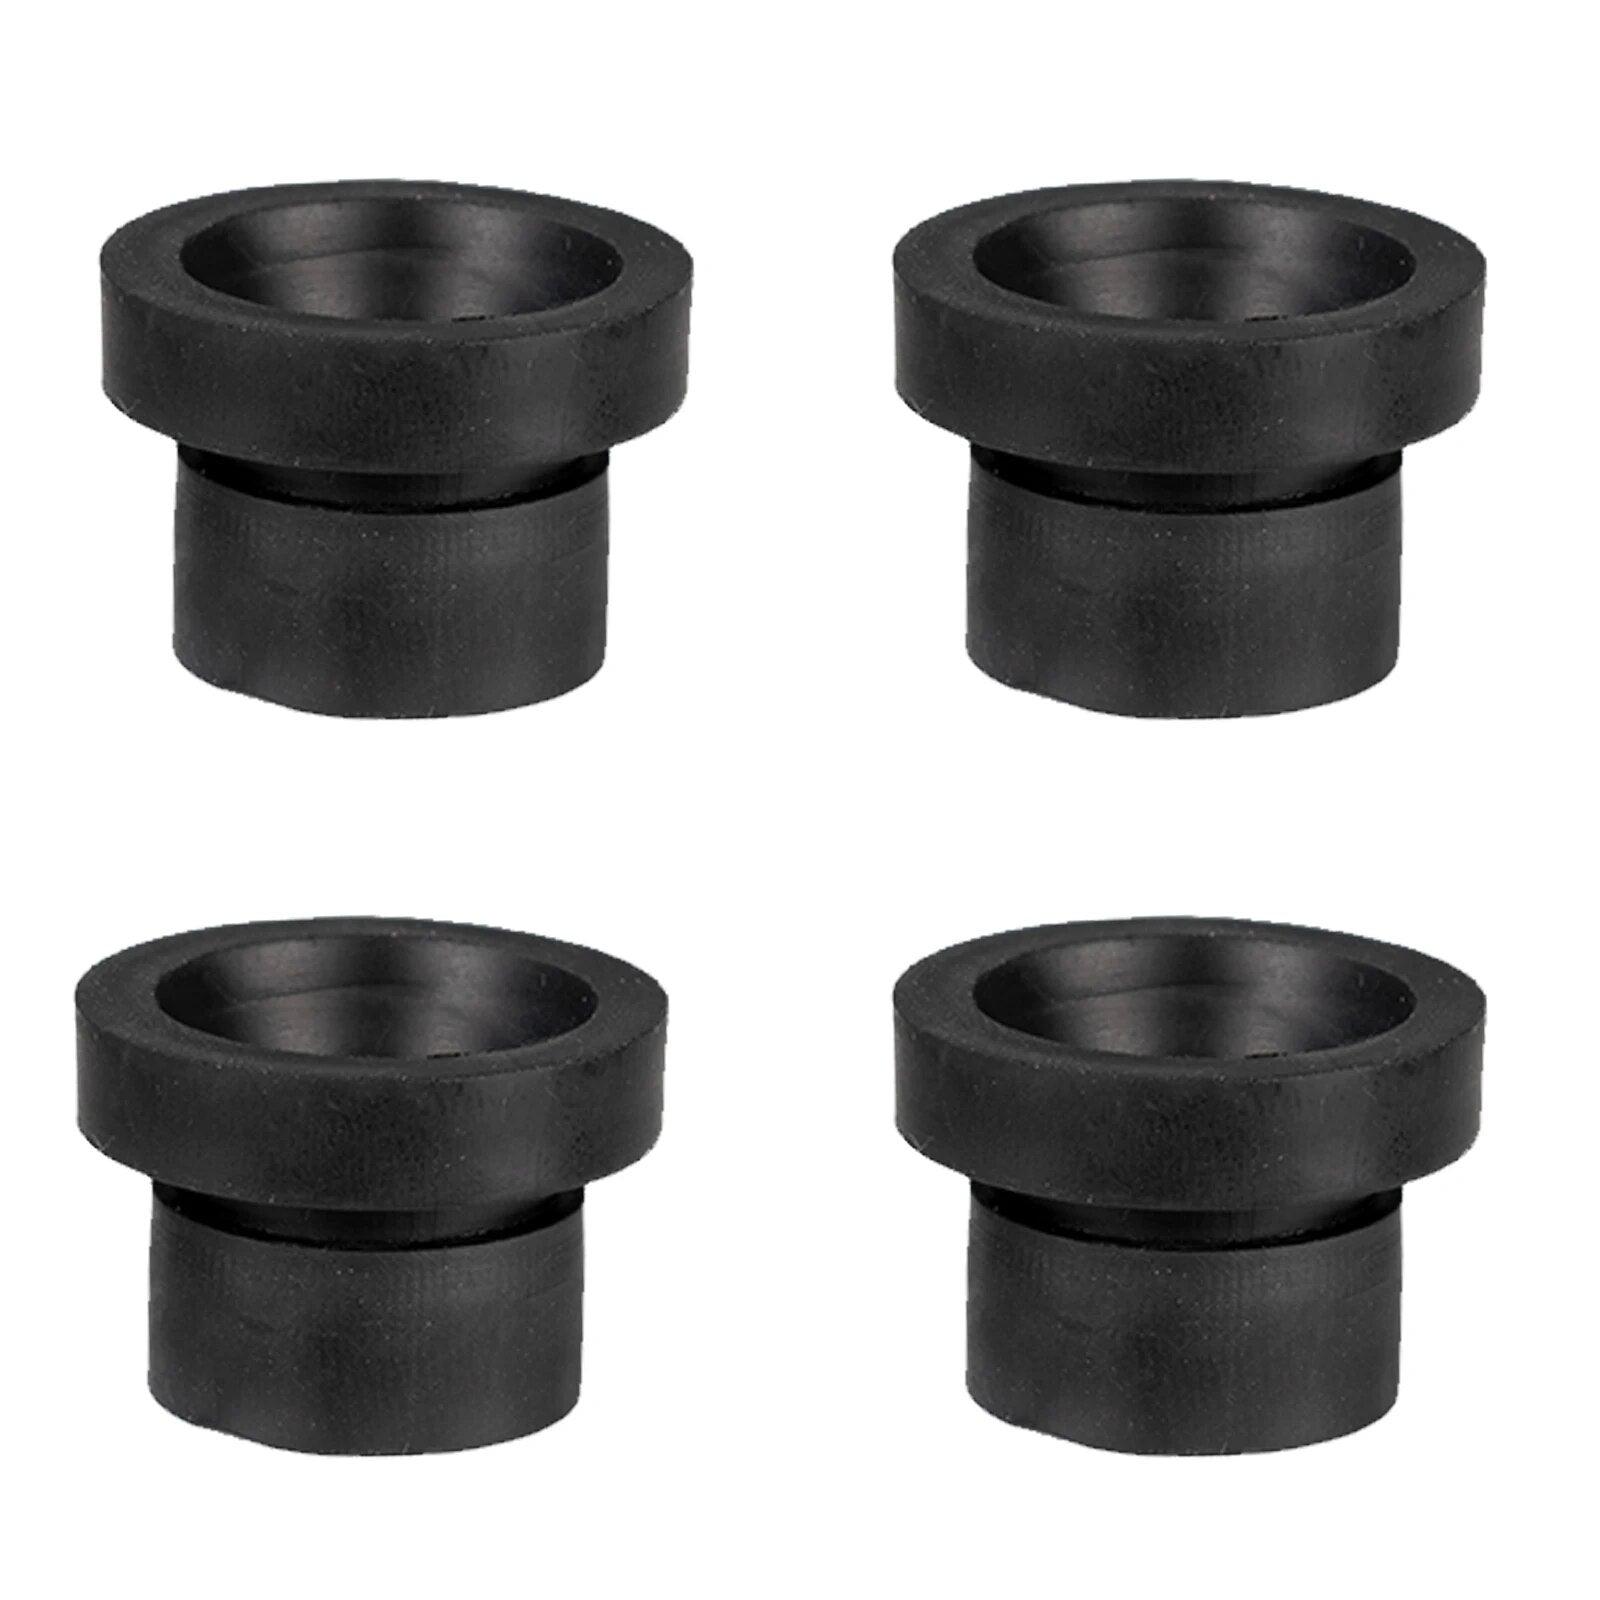 4X Rubber Engine Cover Grommet Buffer Mount Bush Stopper For Ford Focus 2 MK2 Galaxy C S Max Mondeo Mk4 4 Engine Bonnets Gaskets